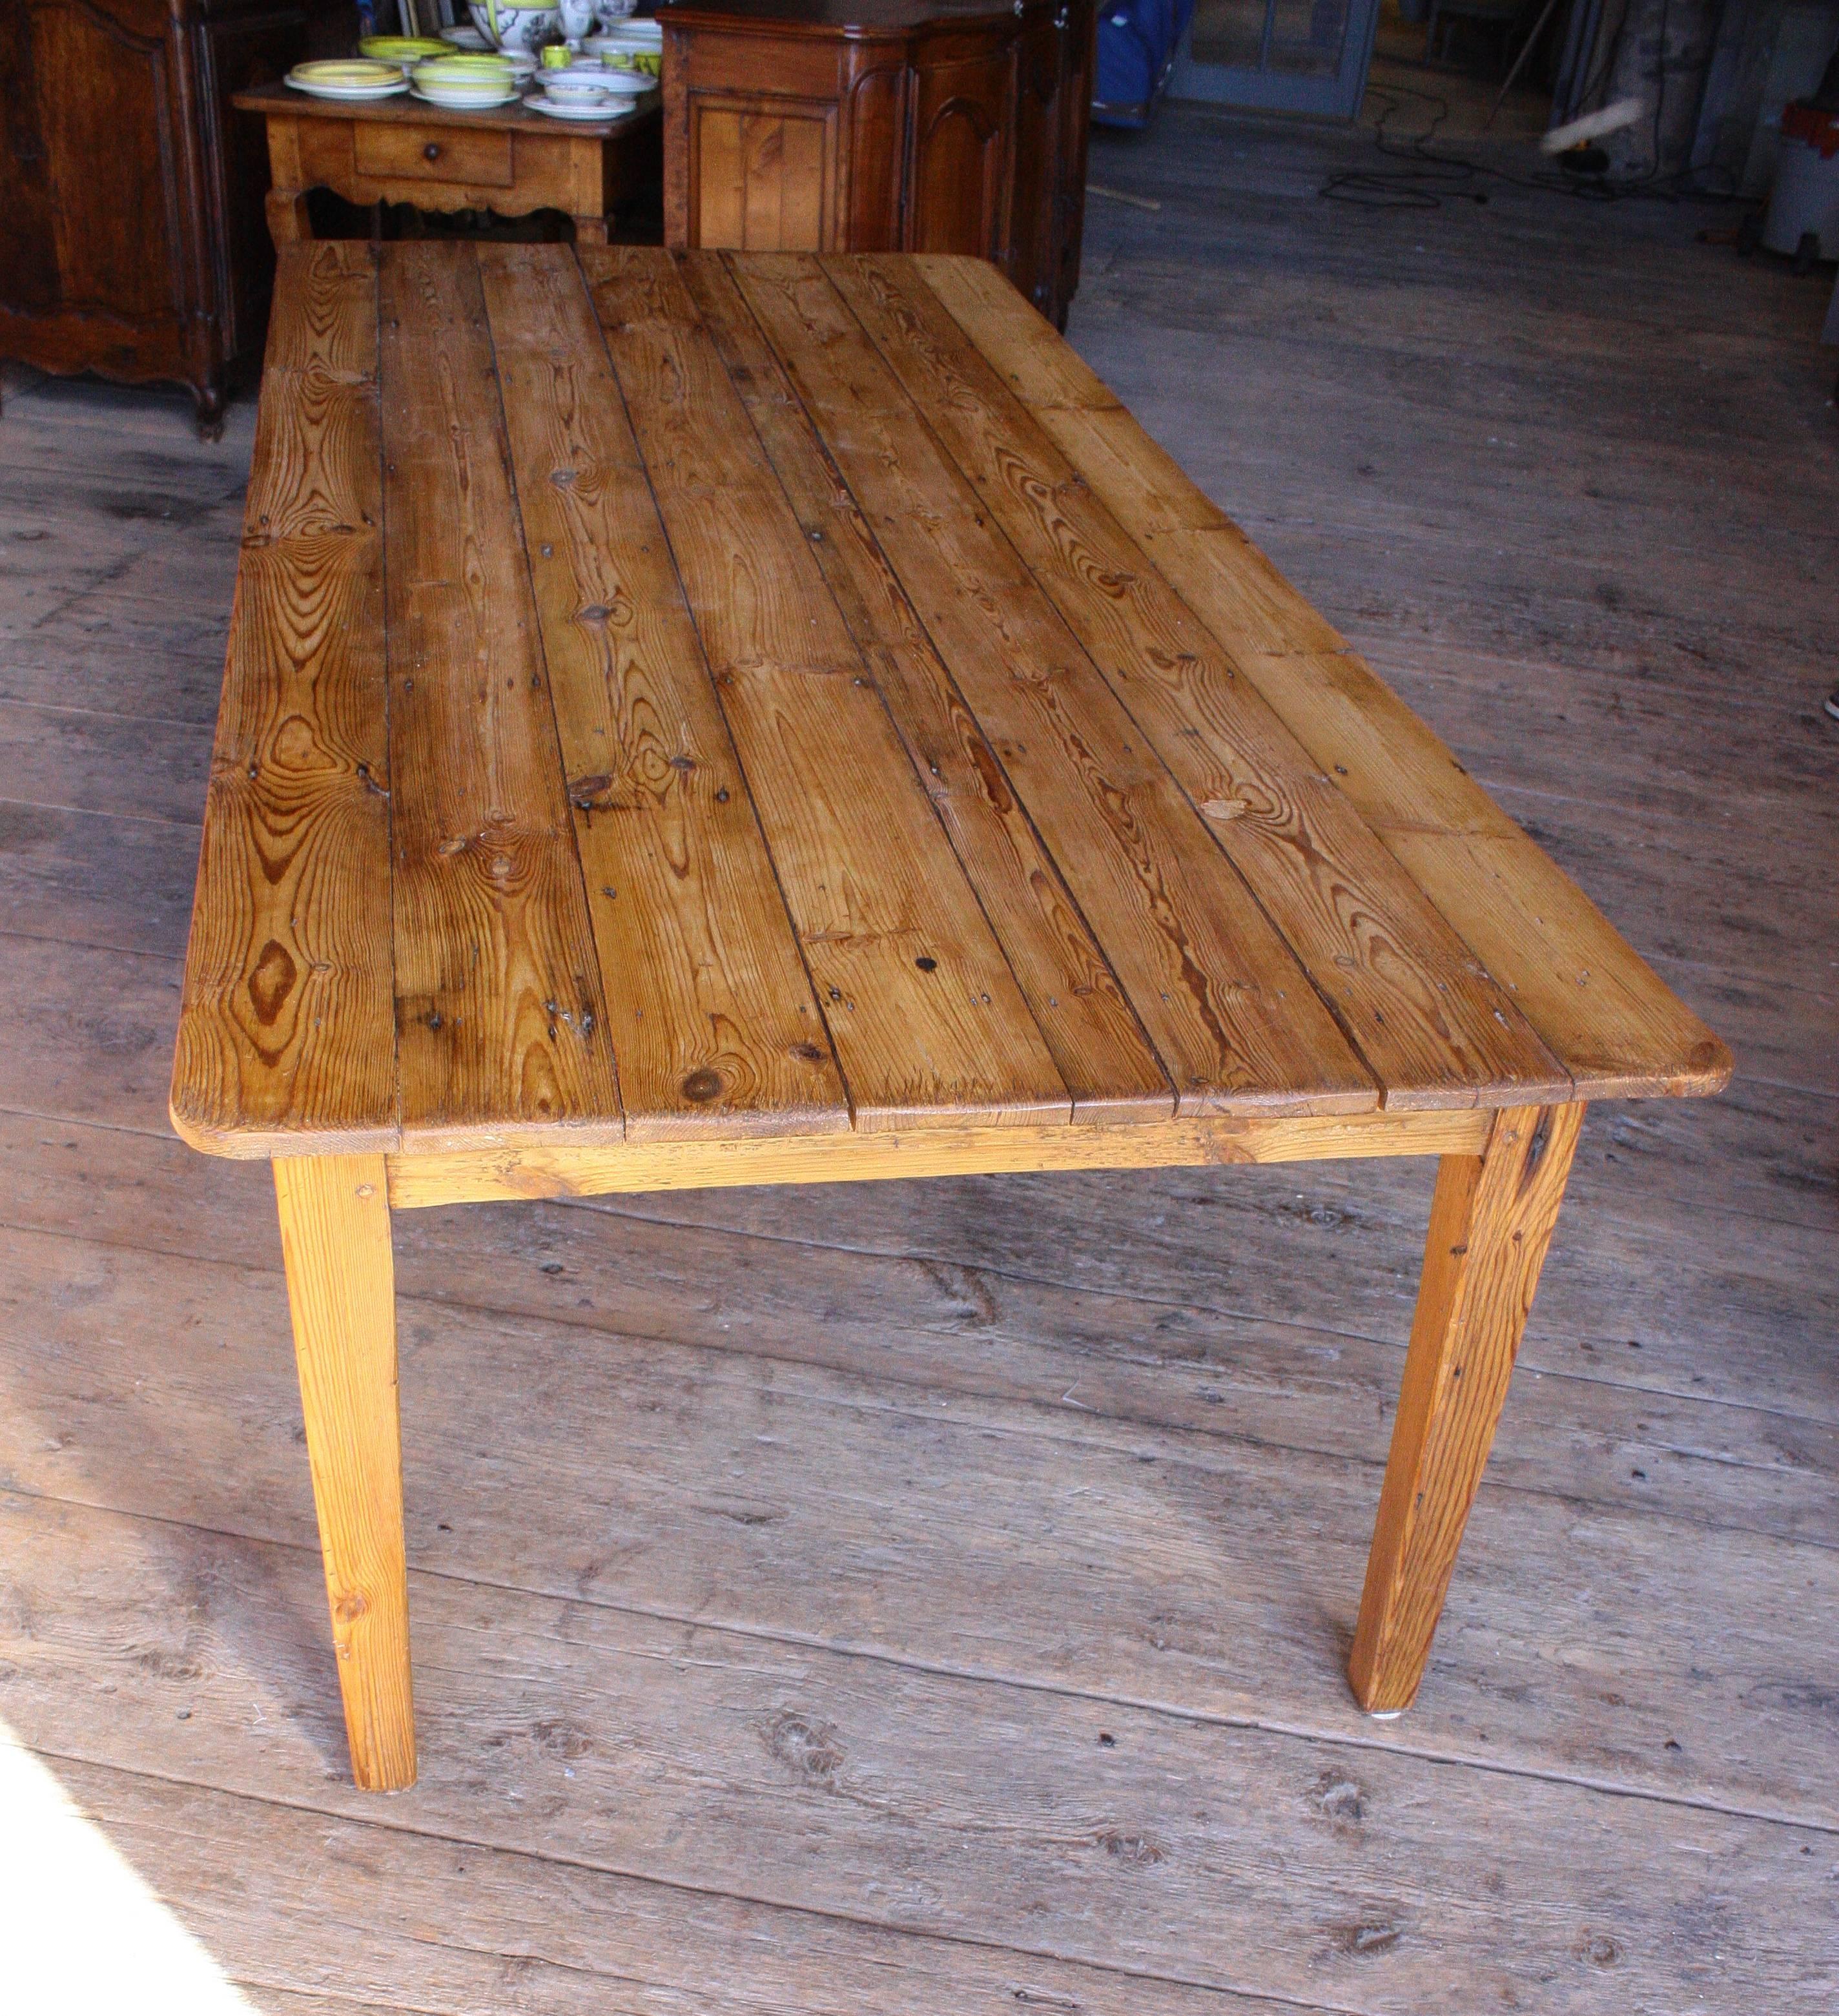 A French country style pine farm table with tapered square legs and a simple apron.